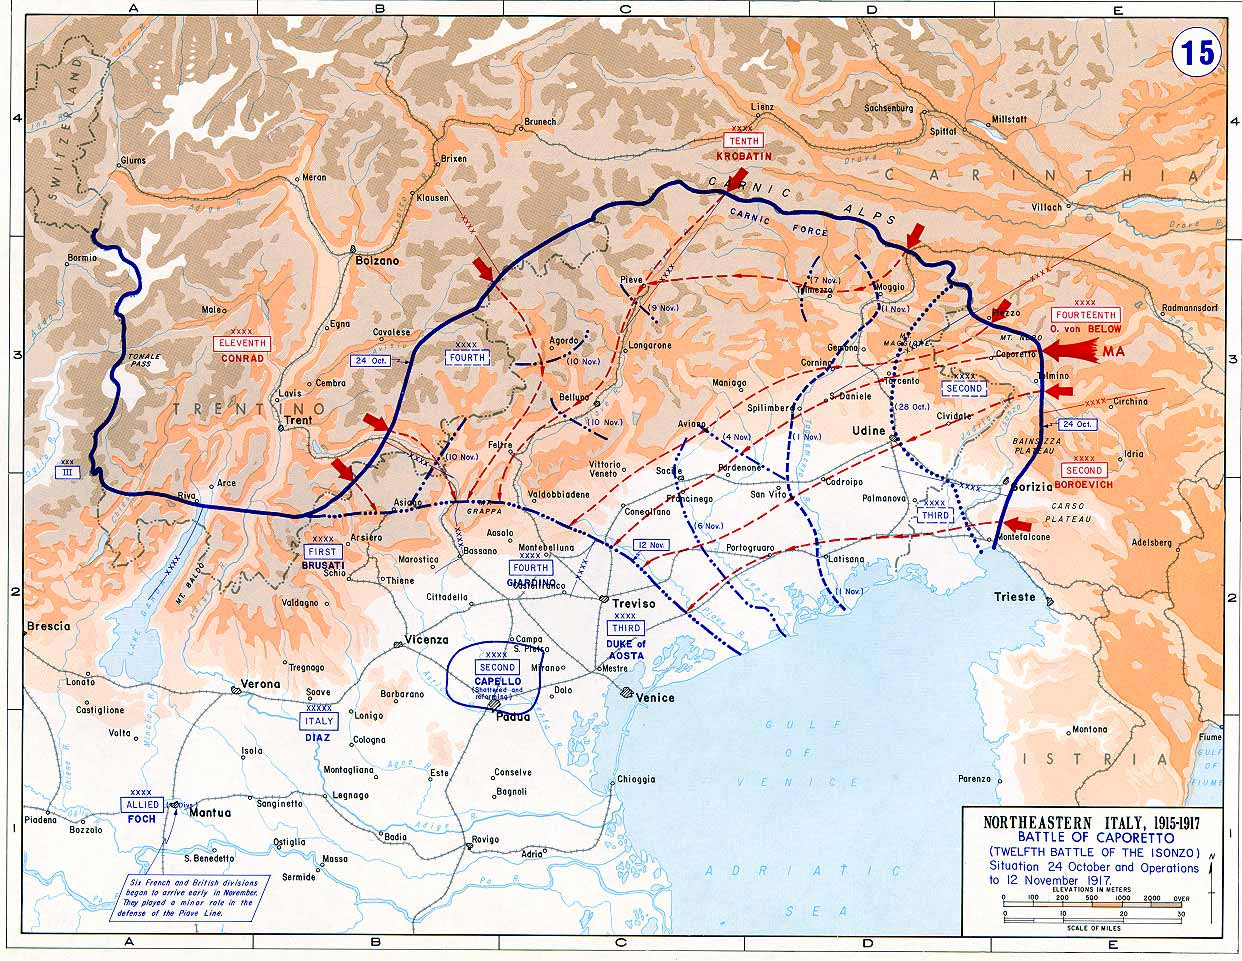 Map showing the northern extent of the Italian frontline before and after the Battle of Caporetto.